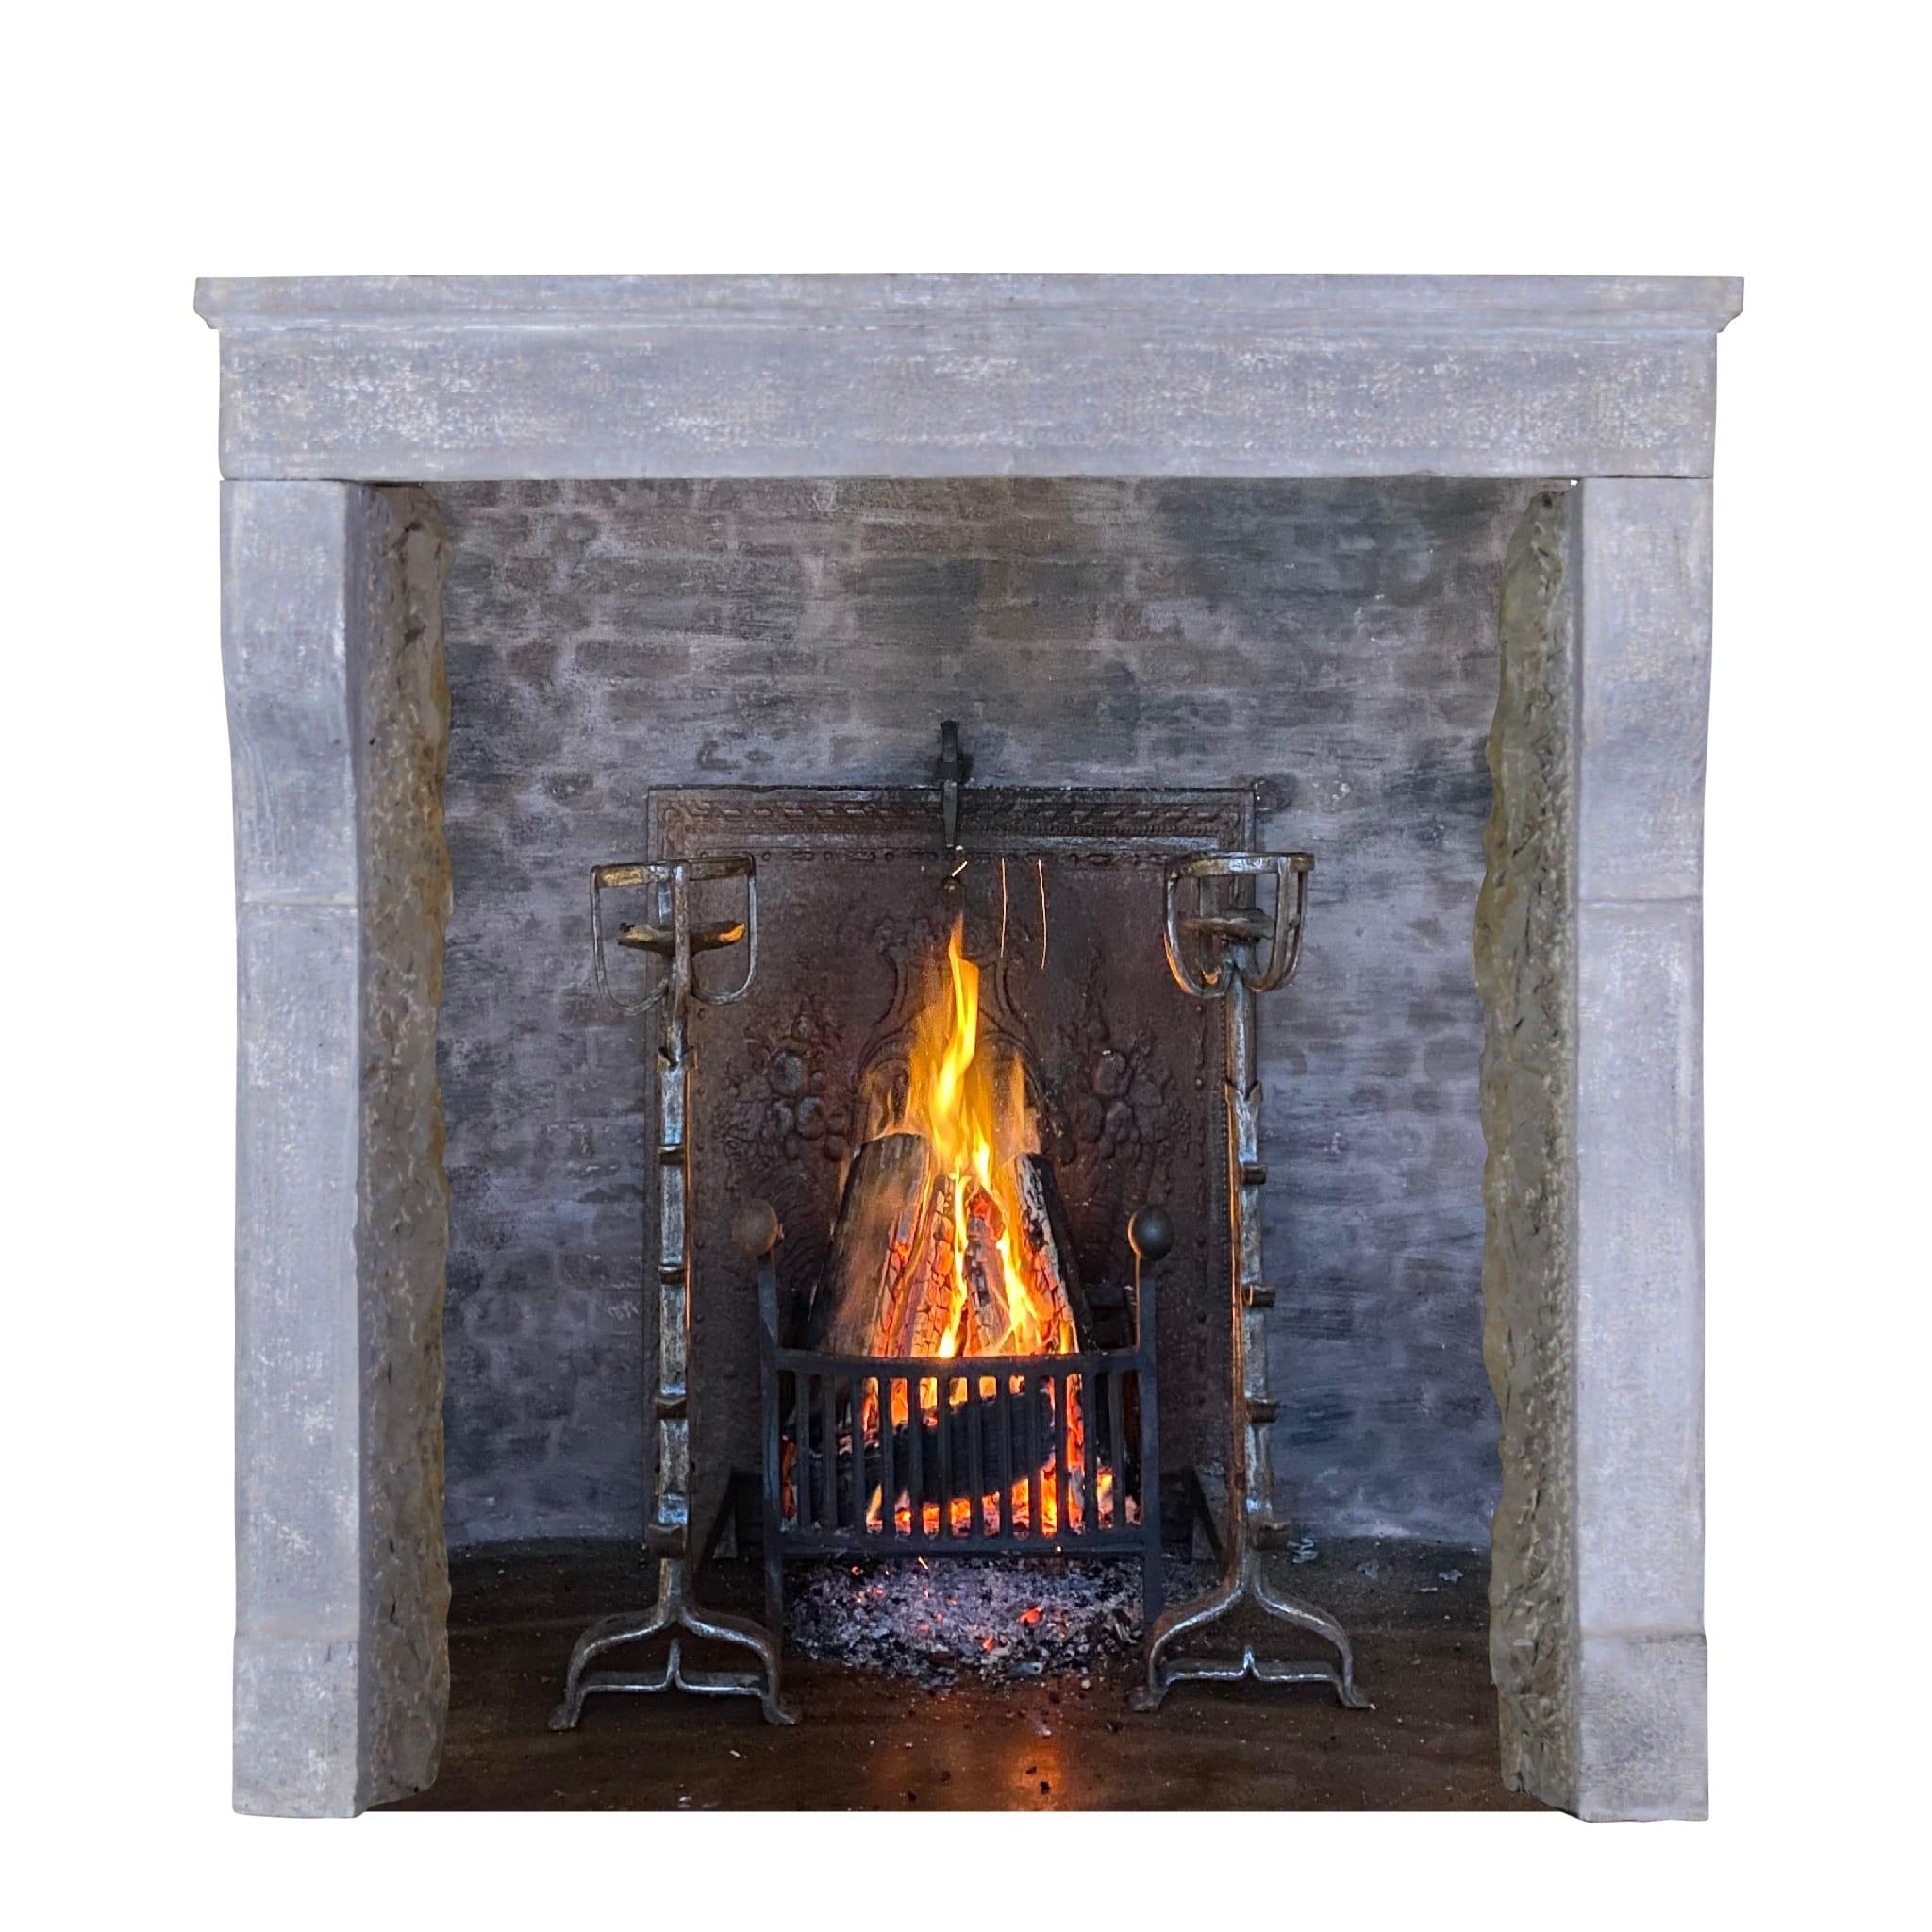 This is a very unusual fireplace surround in French hard limestone. This mantle boasts very fine detail and its original patina. It is composed of three solid blocks and is ready for installation. Its simple country, yet elegant style will make a